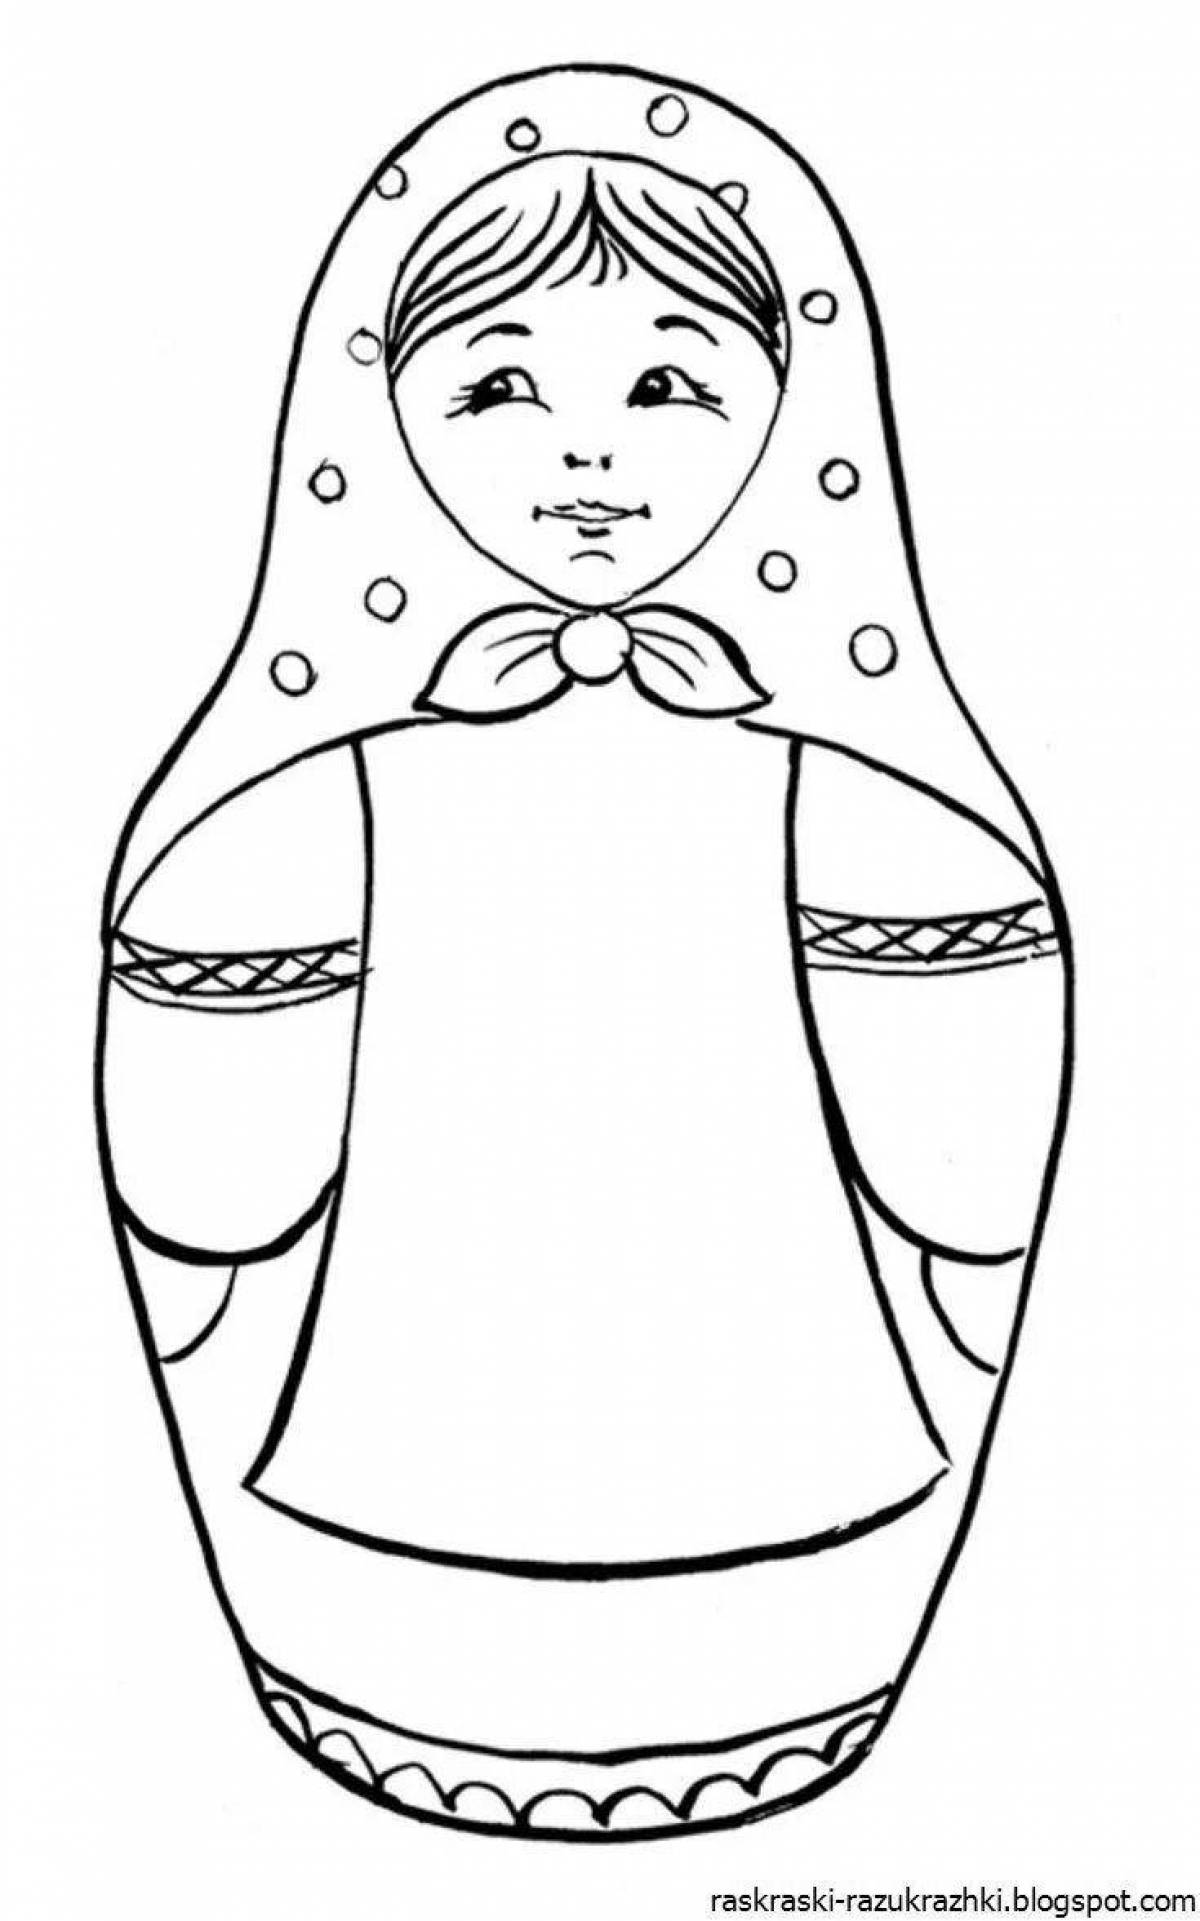 Coloring book sparkling matryoshka for the little ones